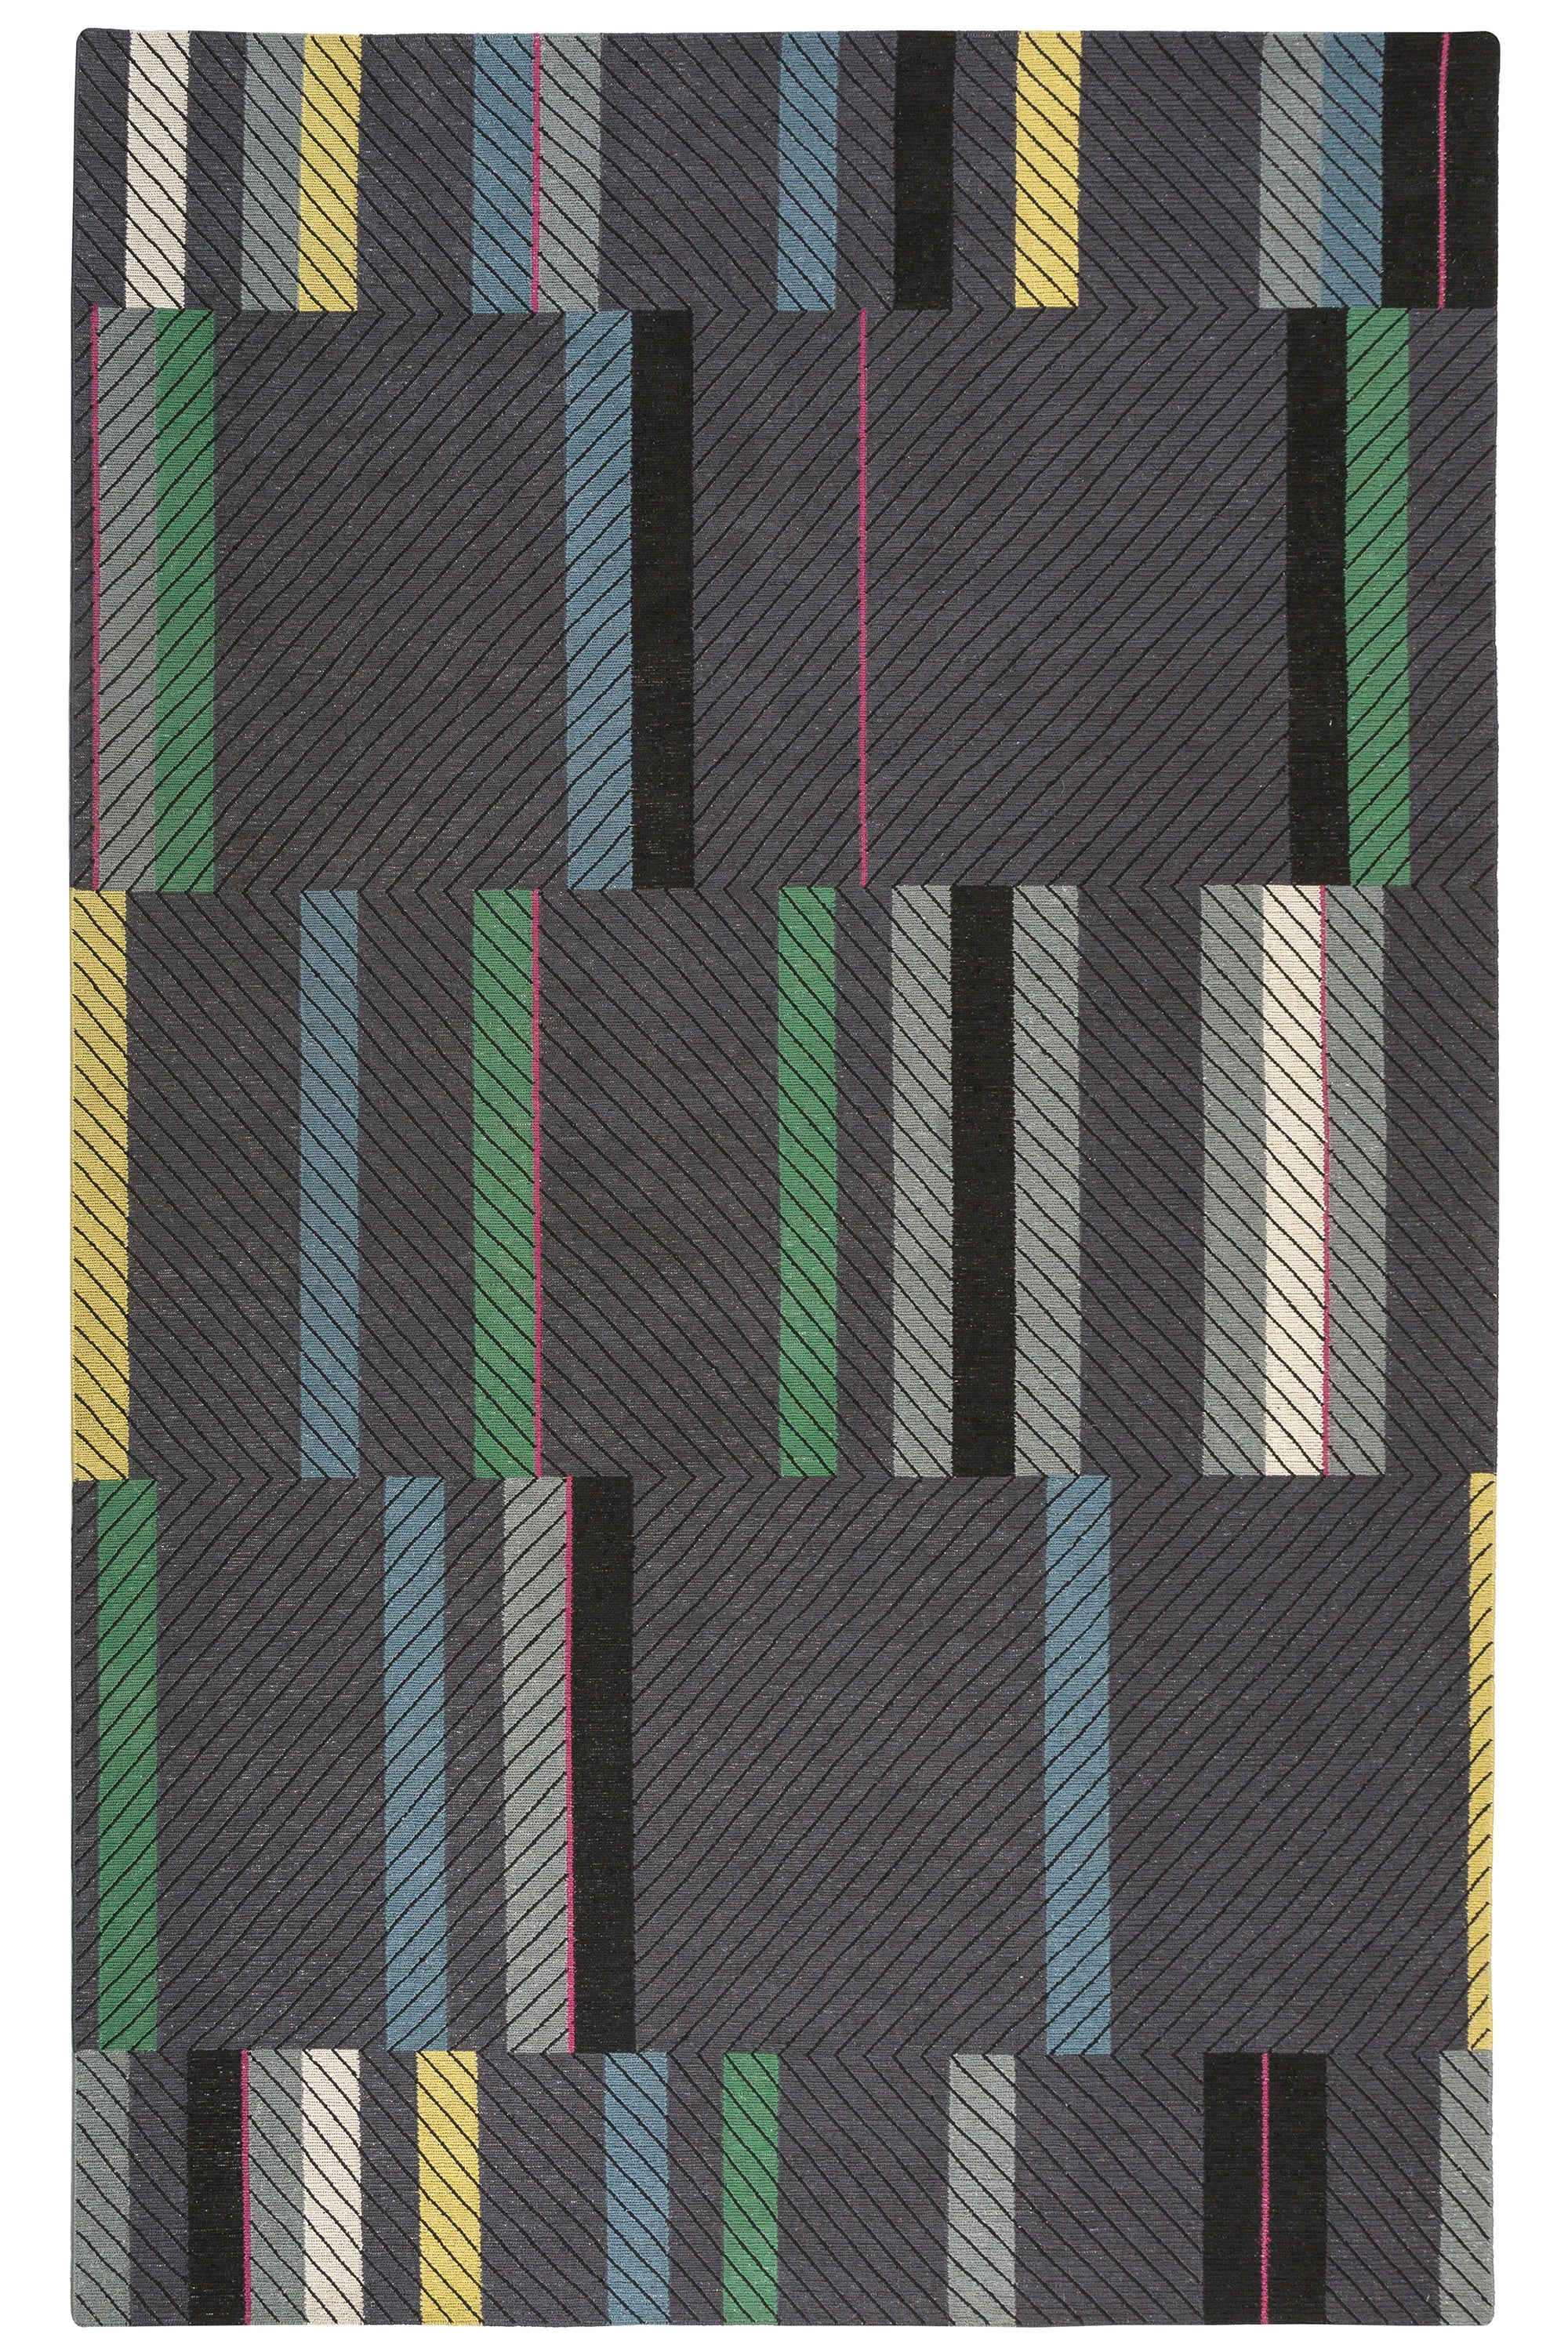 Full Size Amelia Rug in Spinel featuring a minimalist broken stripe pattern, overlayed with thin black diagonal lines. The broken stripes are a mix of white, grey, kelly green, denim blue, black with hot pink accents, all on a charcoal grey field. 